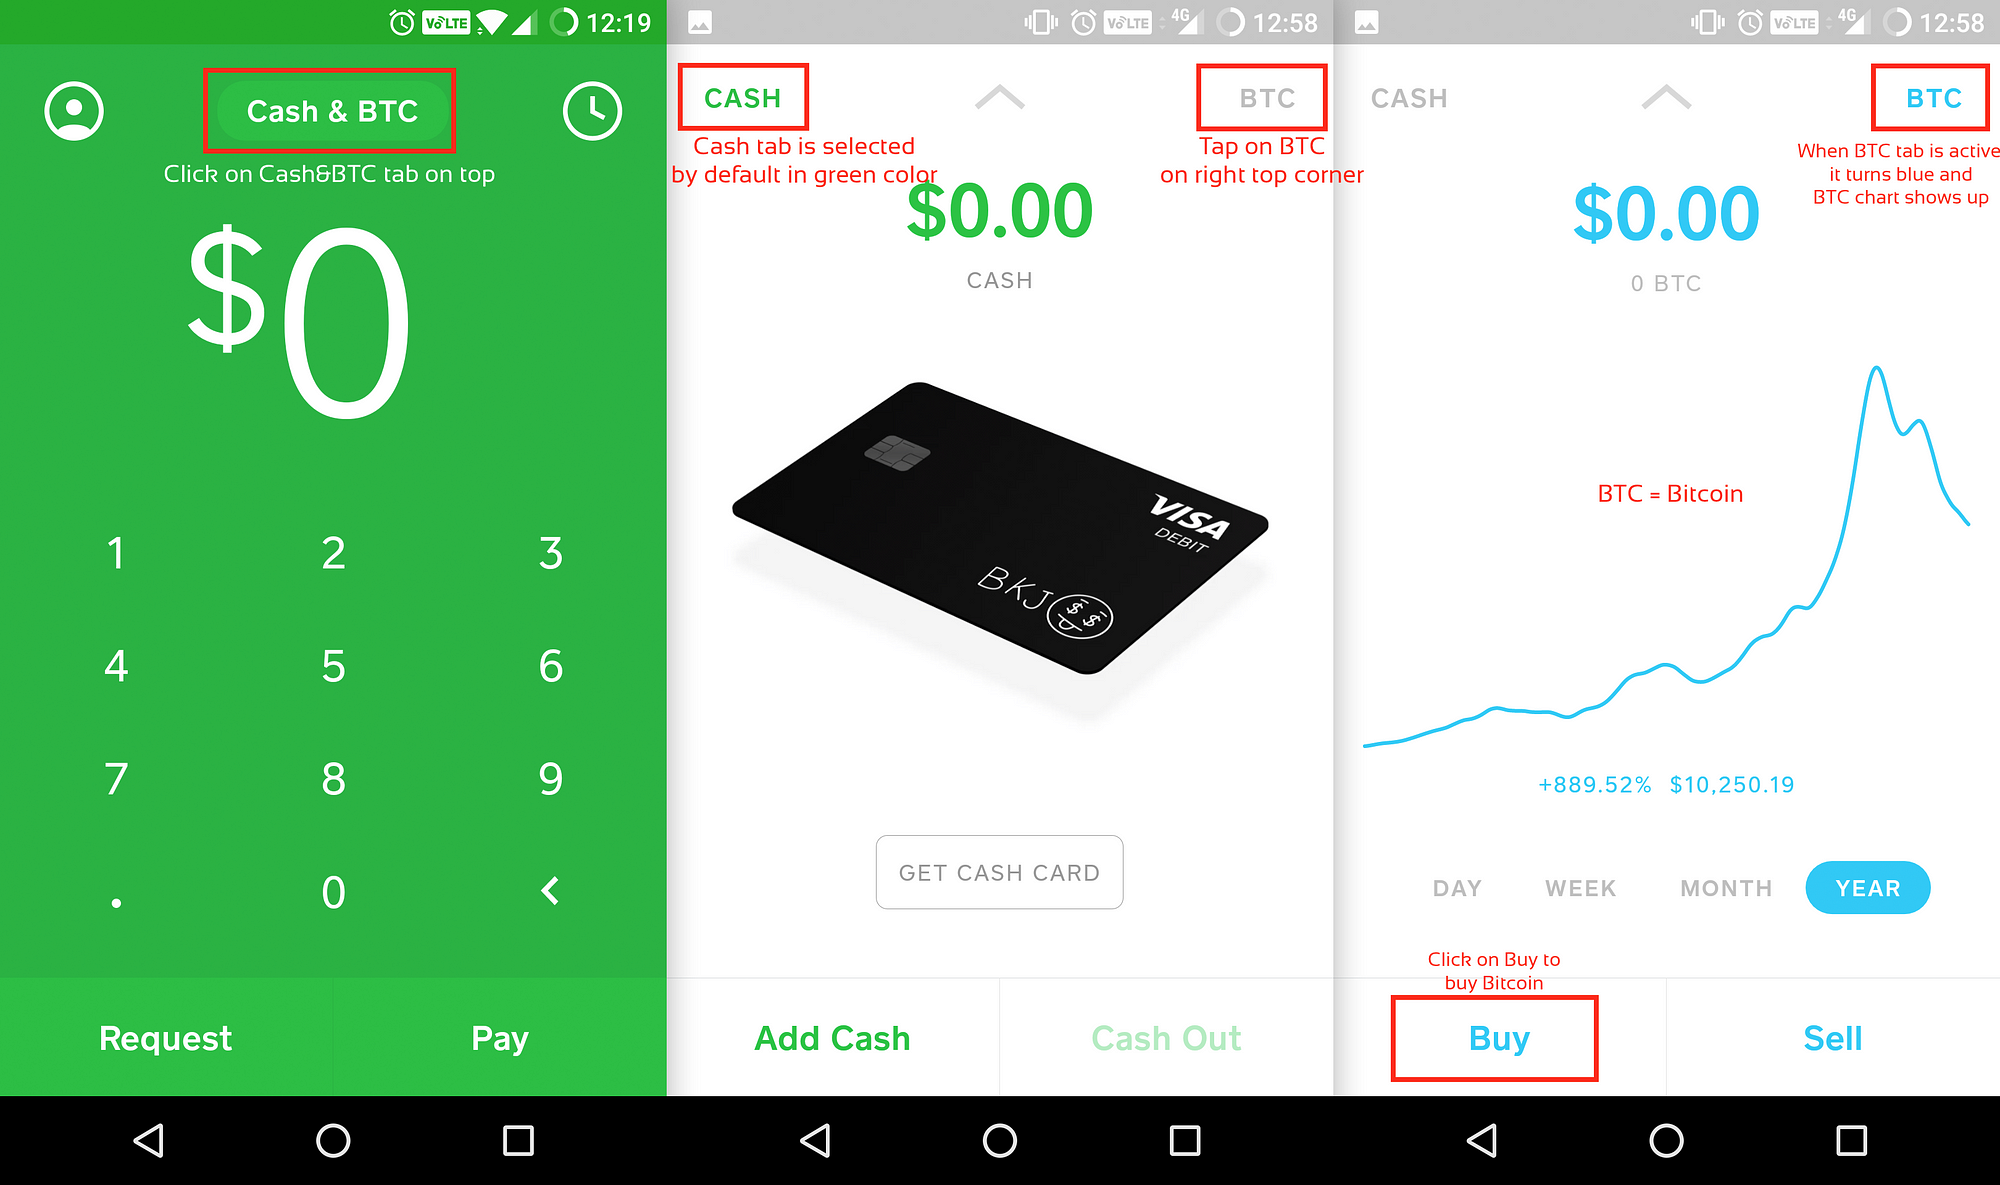 What happens when you enable bitcoin on cash app